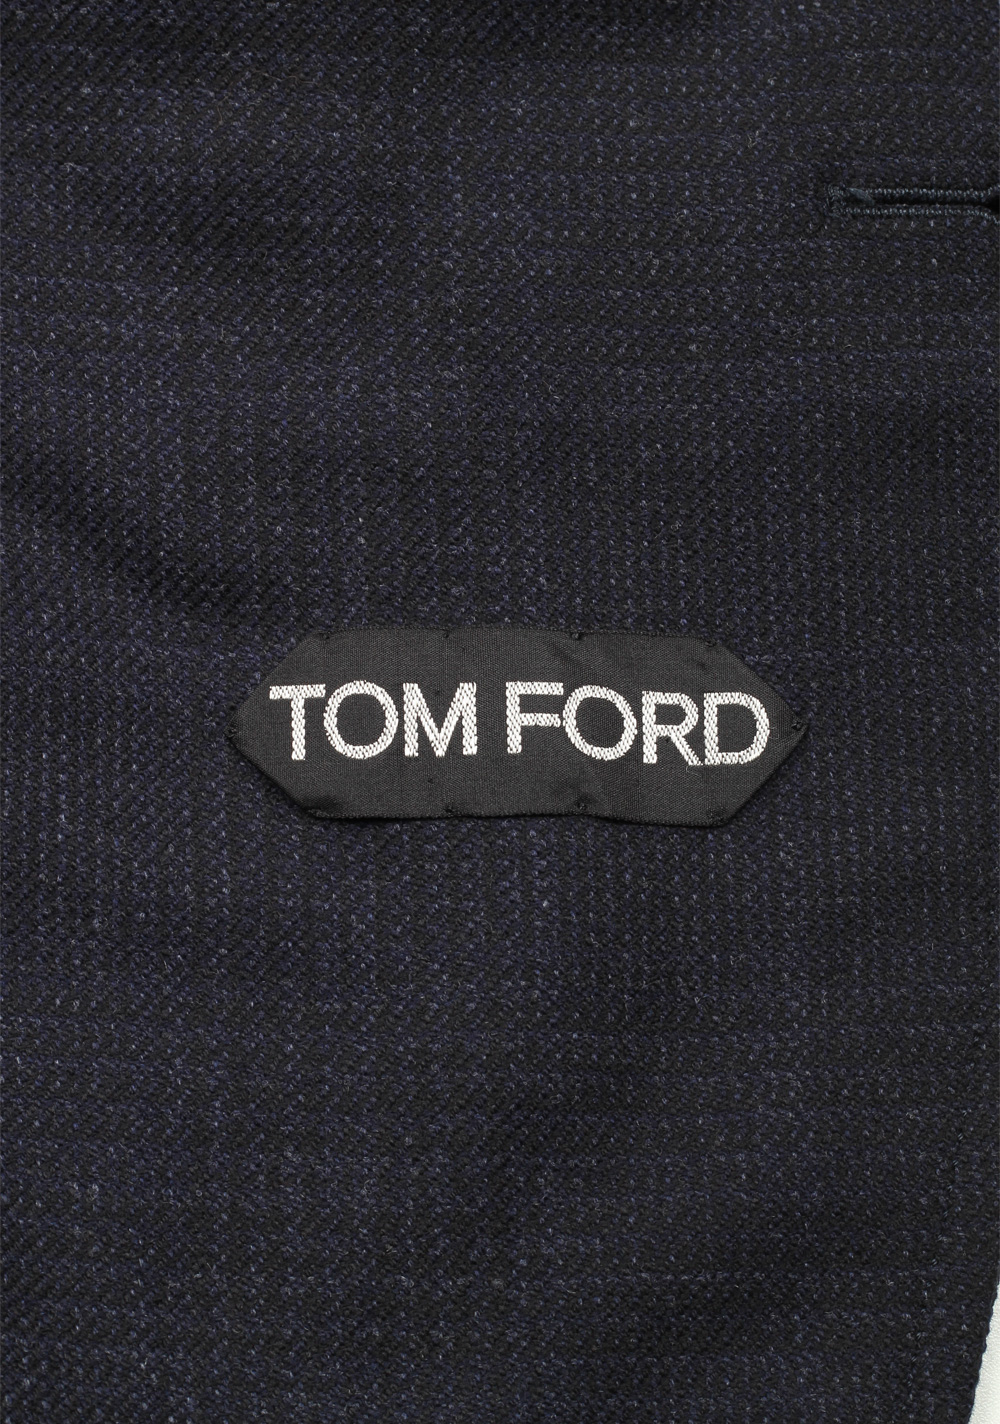 TOM FORD Shelton Checked Blue Sport Coat Size 46 / 36R In Wool Cashmere | Costume Limité